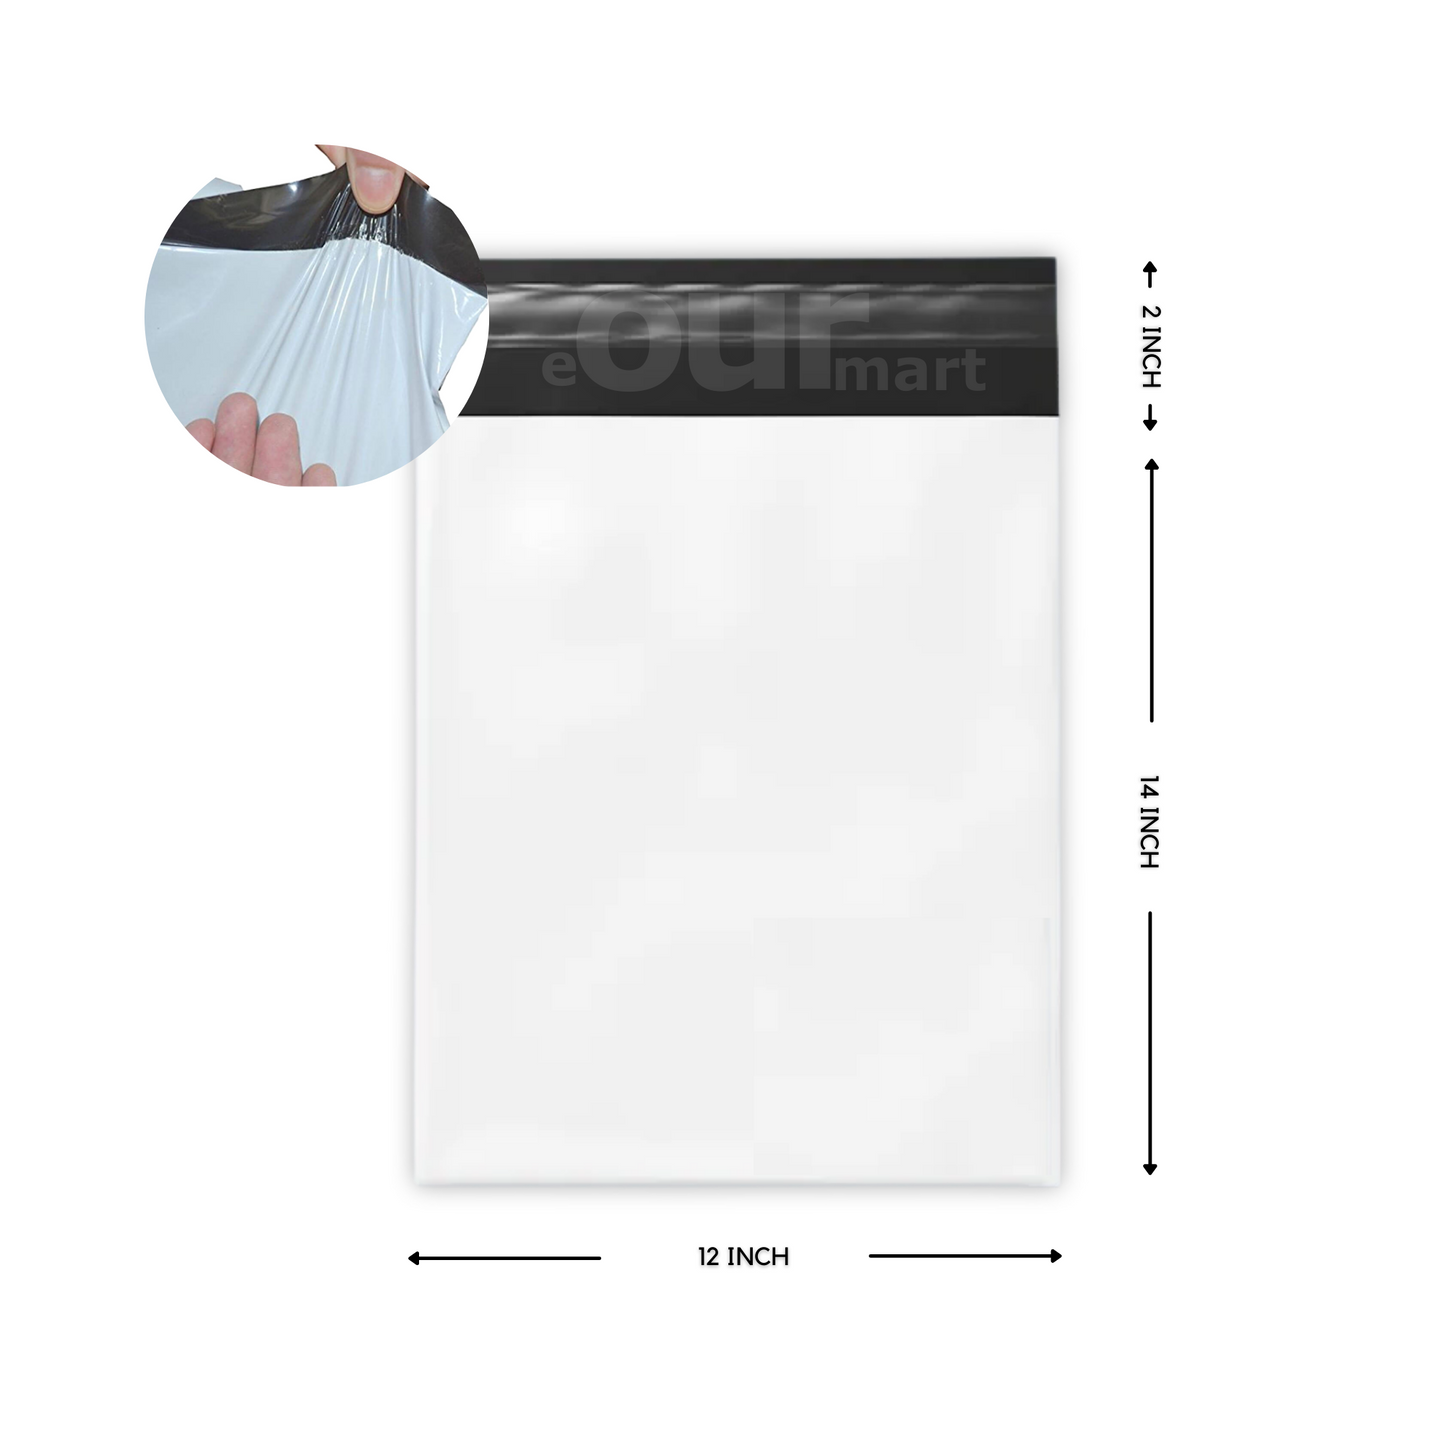 Courier Bags/Envelopes/Pouches/Cover 12X14 inches+ 2inch Flap  Pack of 100 Tamper Proof Plastic Polybags for Shipping/Packing (With POD)